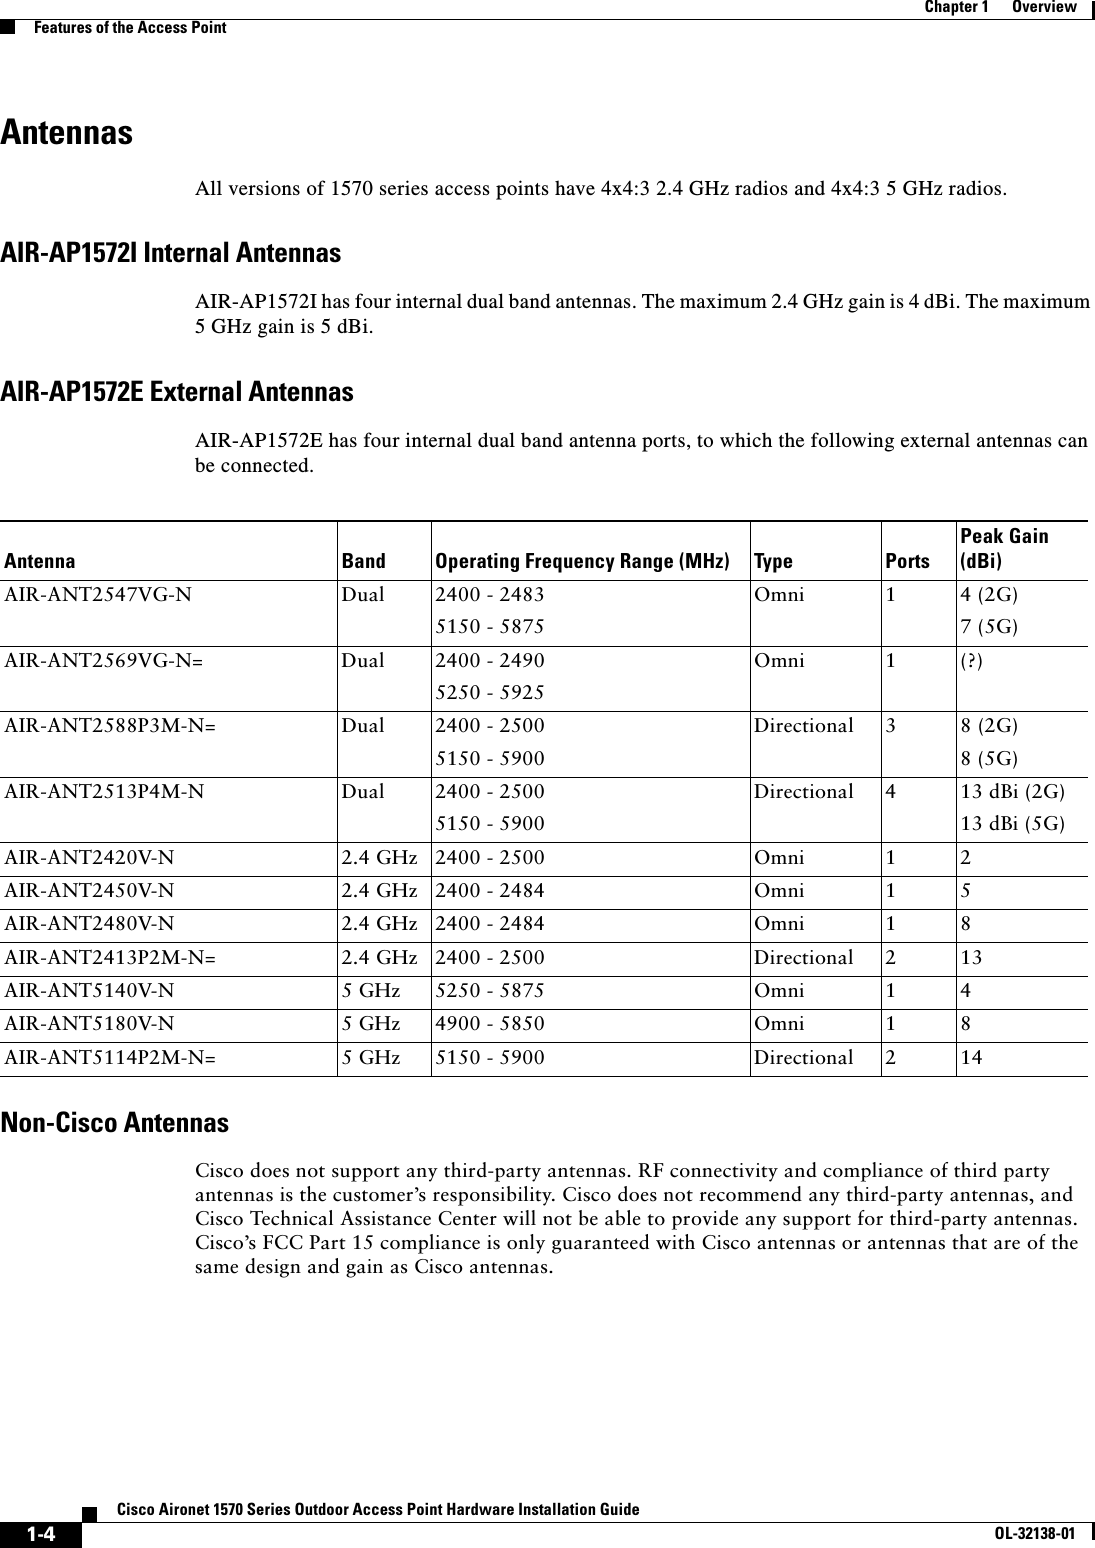  1-4Cisco Aironet 1570 Series Outdoor Access Point Hardware Installation GuideOL-32138-01Chapter 1      OverviewFeatures of the Access PointAntennasAll versions of 1570 series access points have 4x4:3 2.4 GHz radios and 4x4:3 5 GHz radios.AIR-AP1572I Internal AntennasAIR-AP1572I has four internal dual band antennas. The maximum 2.4 GHz gain is 4 dBi. The maximum 5 GHz gain is 5 dBi.AIR-AP1572E External AntennasAIR-AP1572E has four internal dual band antenna ports, to which the following external antennas can be connected.Non-Cisco AntennasCisco does not support any third-party antennas. RF connectivity and compliance of third party antennas is the customer’s responsibility. Cisco does not recommend any third-party antennas, and Cisco Technical Assistance Center will not be able to provide any support for third-party antennas. Cisco’s FCC Part 15 compliance is only guaranteed with Cisco antennas or antennas that are of the same design and gain as Cisco antennas.Antenna Band Operating Frequency Range (MHz) Type PortsPeak Gain (dBi)AIR-ANT2547VG-N Dual 2400 - 24835150 - 5875Omni 1 4 (2G)7 (5G)AIR-ANT2569VG-N= Dual 2400 - 24905250 - 5925Omni 1 (?)AIR-ANT2588P3M-N= Dual 2400 - 25005150 - 5900Directional 3 8 (2G)8 (5G)AIR-ANT2513P4M-N Dual 2400 - 25005150 - 5900Directional 4 13 dBi (2G) 13 dBi (5G)AIR-ANT2420V-N 2.4 GHz 2400 - 2500 Omni 1 2AIR-ANT2450V-N 2.4 GHz 2400 - 2484 Omni 1 5AIR-ANT2480V-N 2.4 GHz 2400 - 2484 Omni 1 8AIR-ANT2413P2M-N= 2.4 GHz 2400 - 2500 Directional 2 13AIR-ANT5140V-N 5 GHz 5250 - 5875 Omni 1 4AIR-ANT5180V-N  5 GHz 4900 - 5850 Omni 1 8AIR-ANT5114P2M-N=  5 GHz 5150 - 5900 Directional 2 14